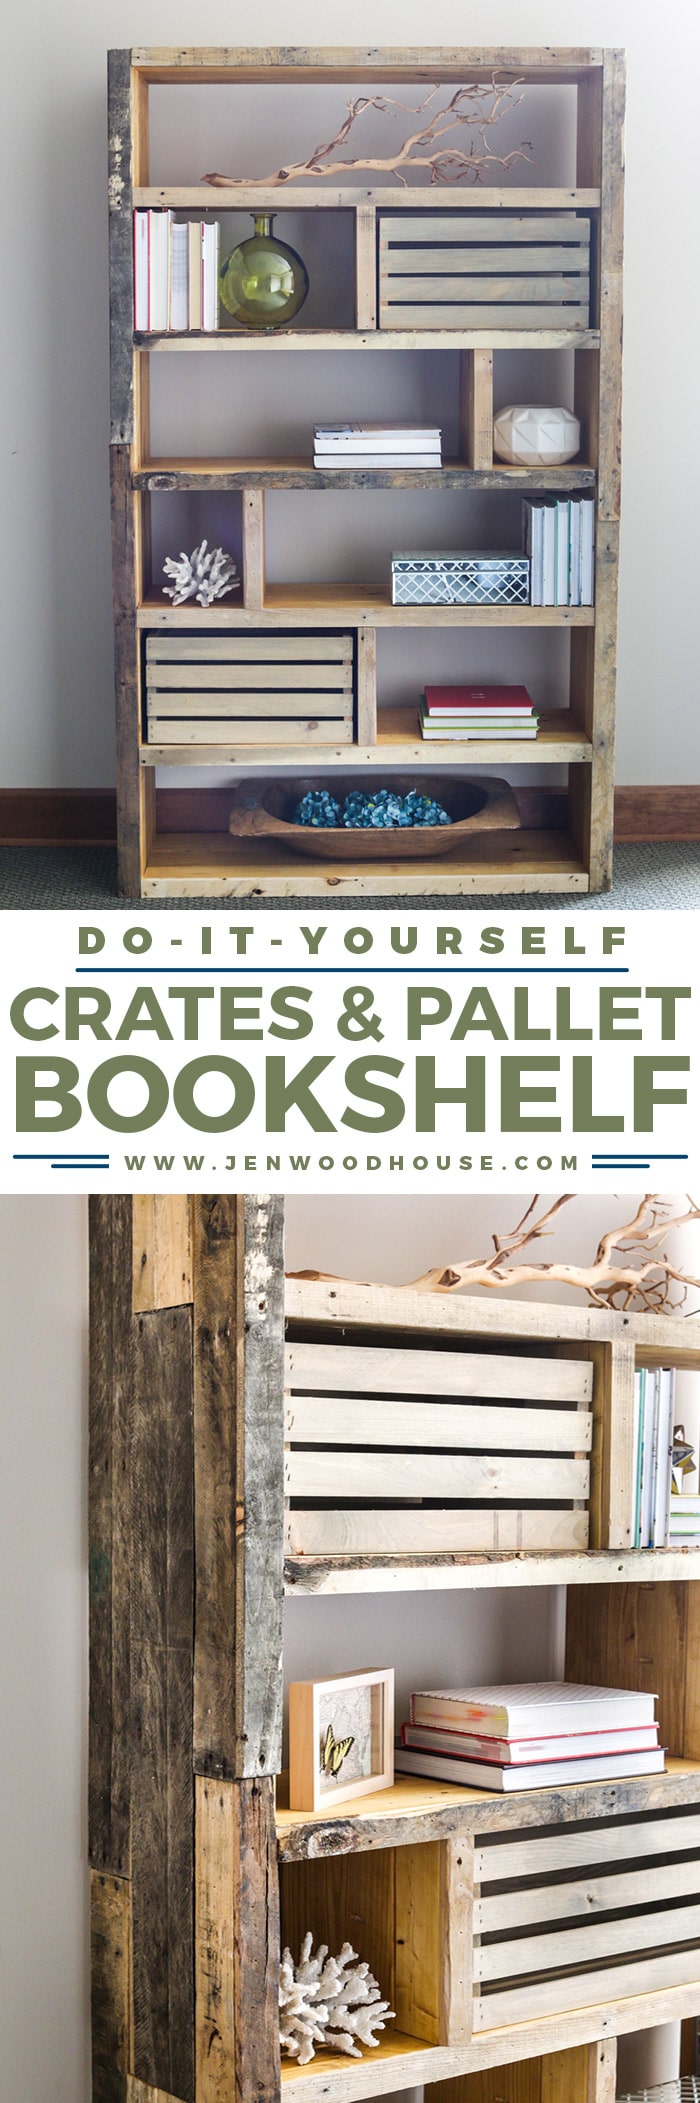 Build this beautiful and rustic bookshelf with reclaimed pallet wood and crates. Free building plans by Jen Woodhouse